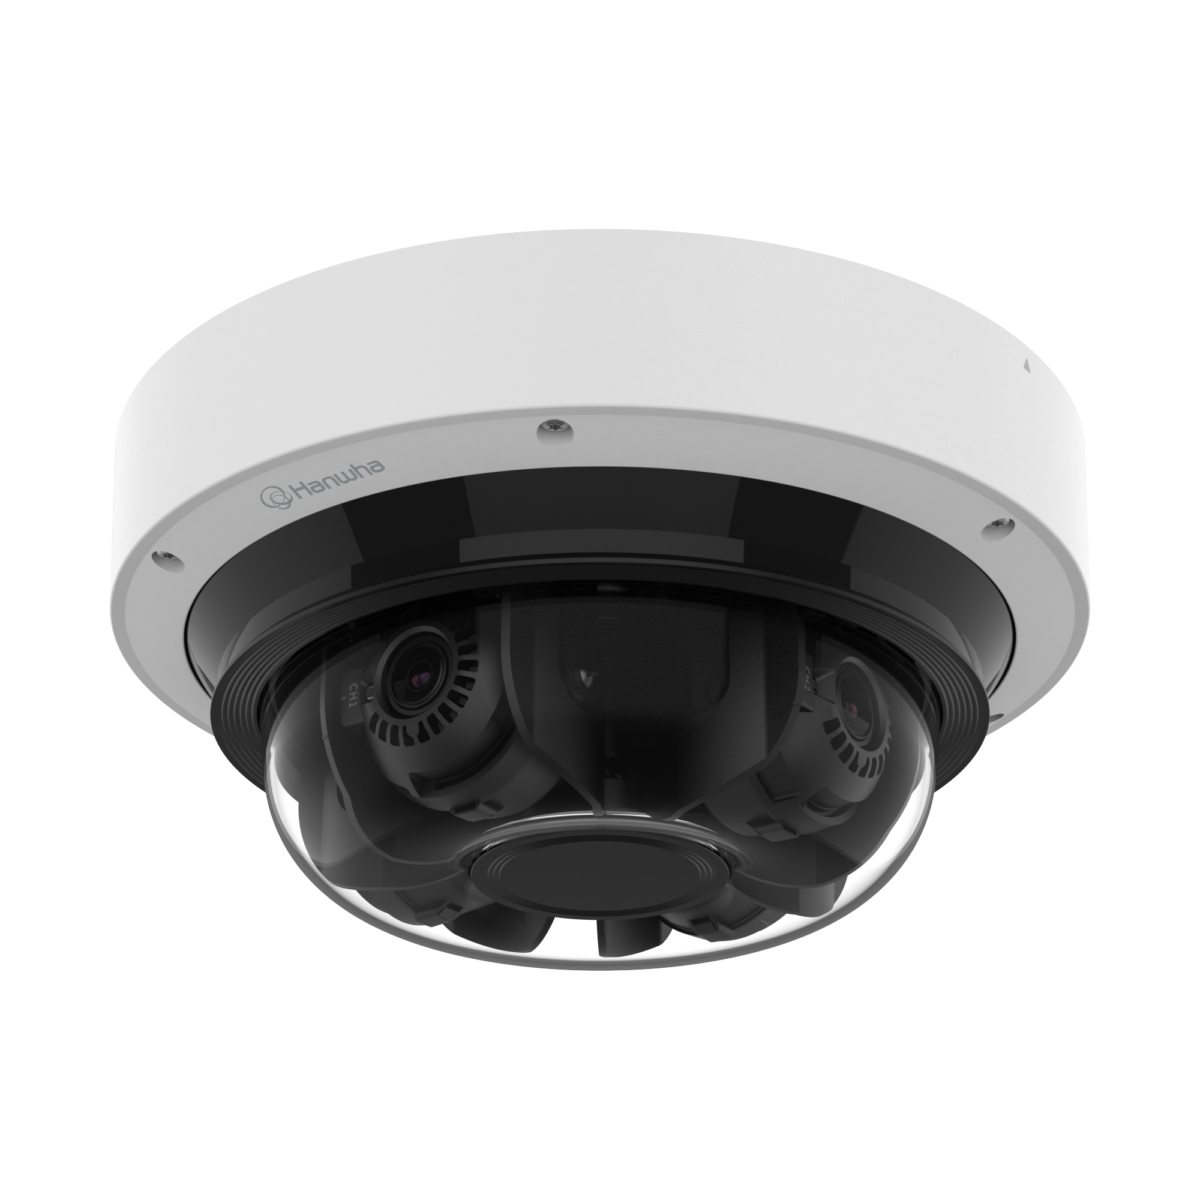 Hanwha PNM-C16083RVQ 4CH x 4MP 30FPS Wisenet P Series Network Vandal Outdoor Multi-Directional Camera